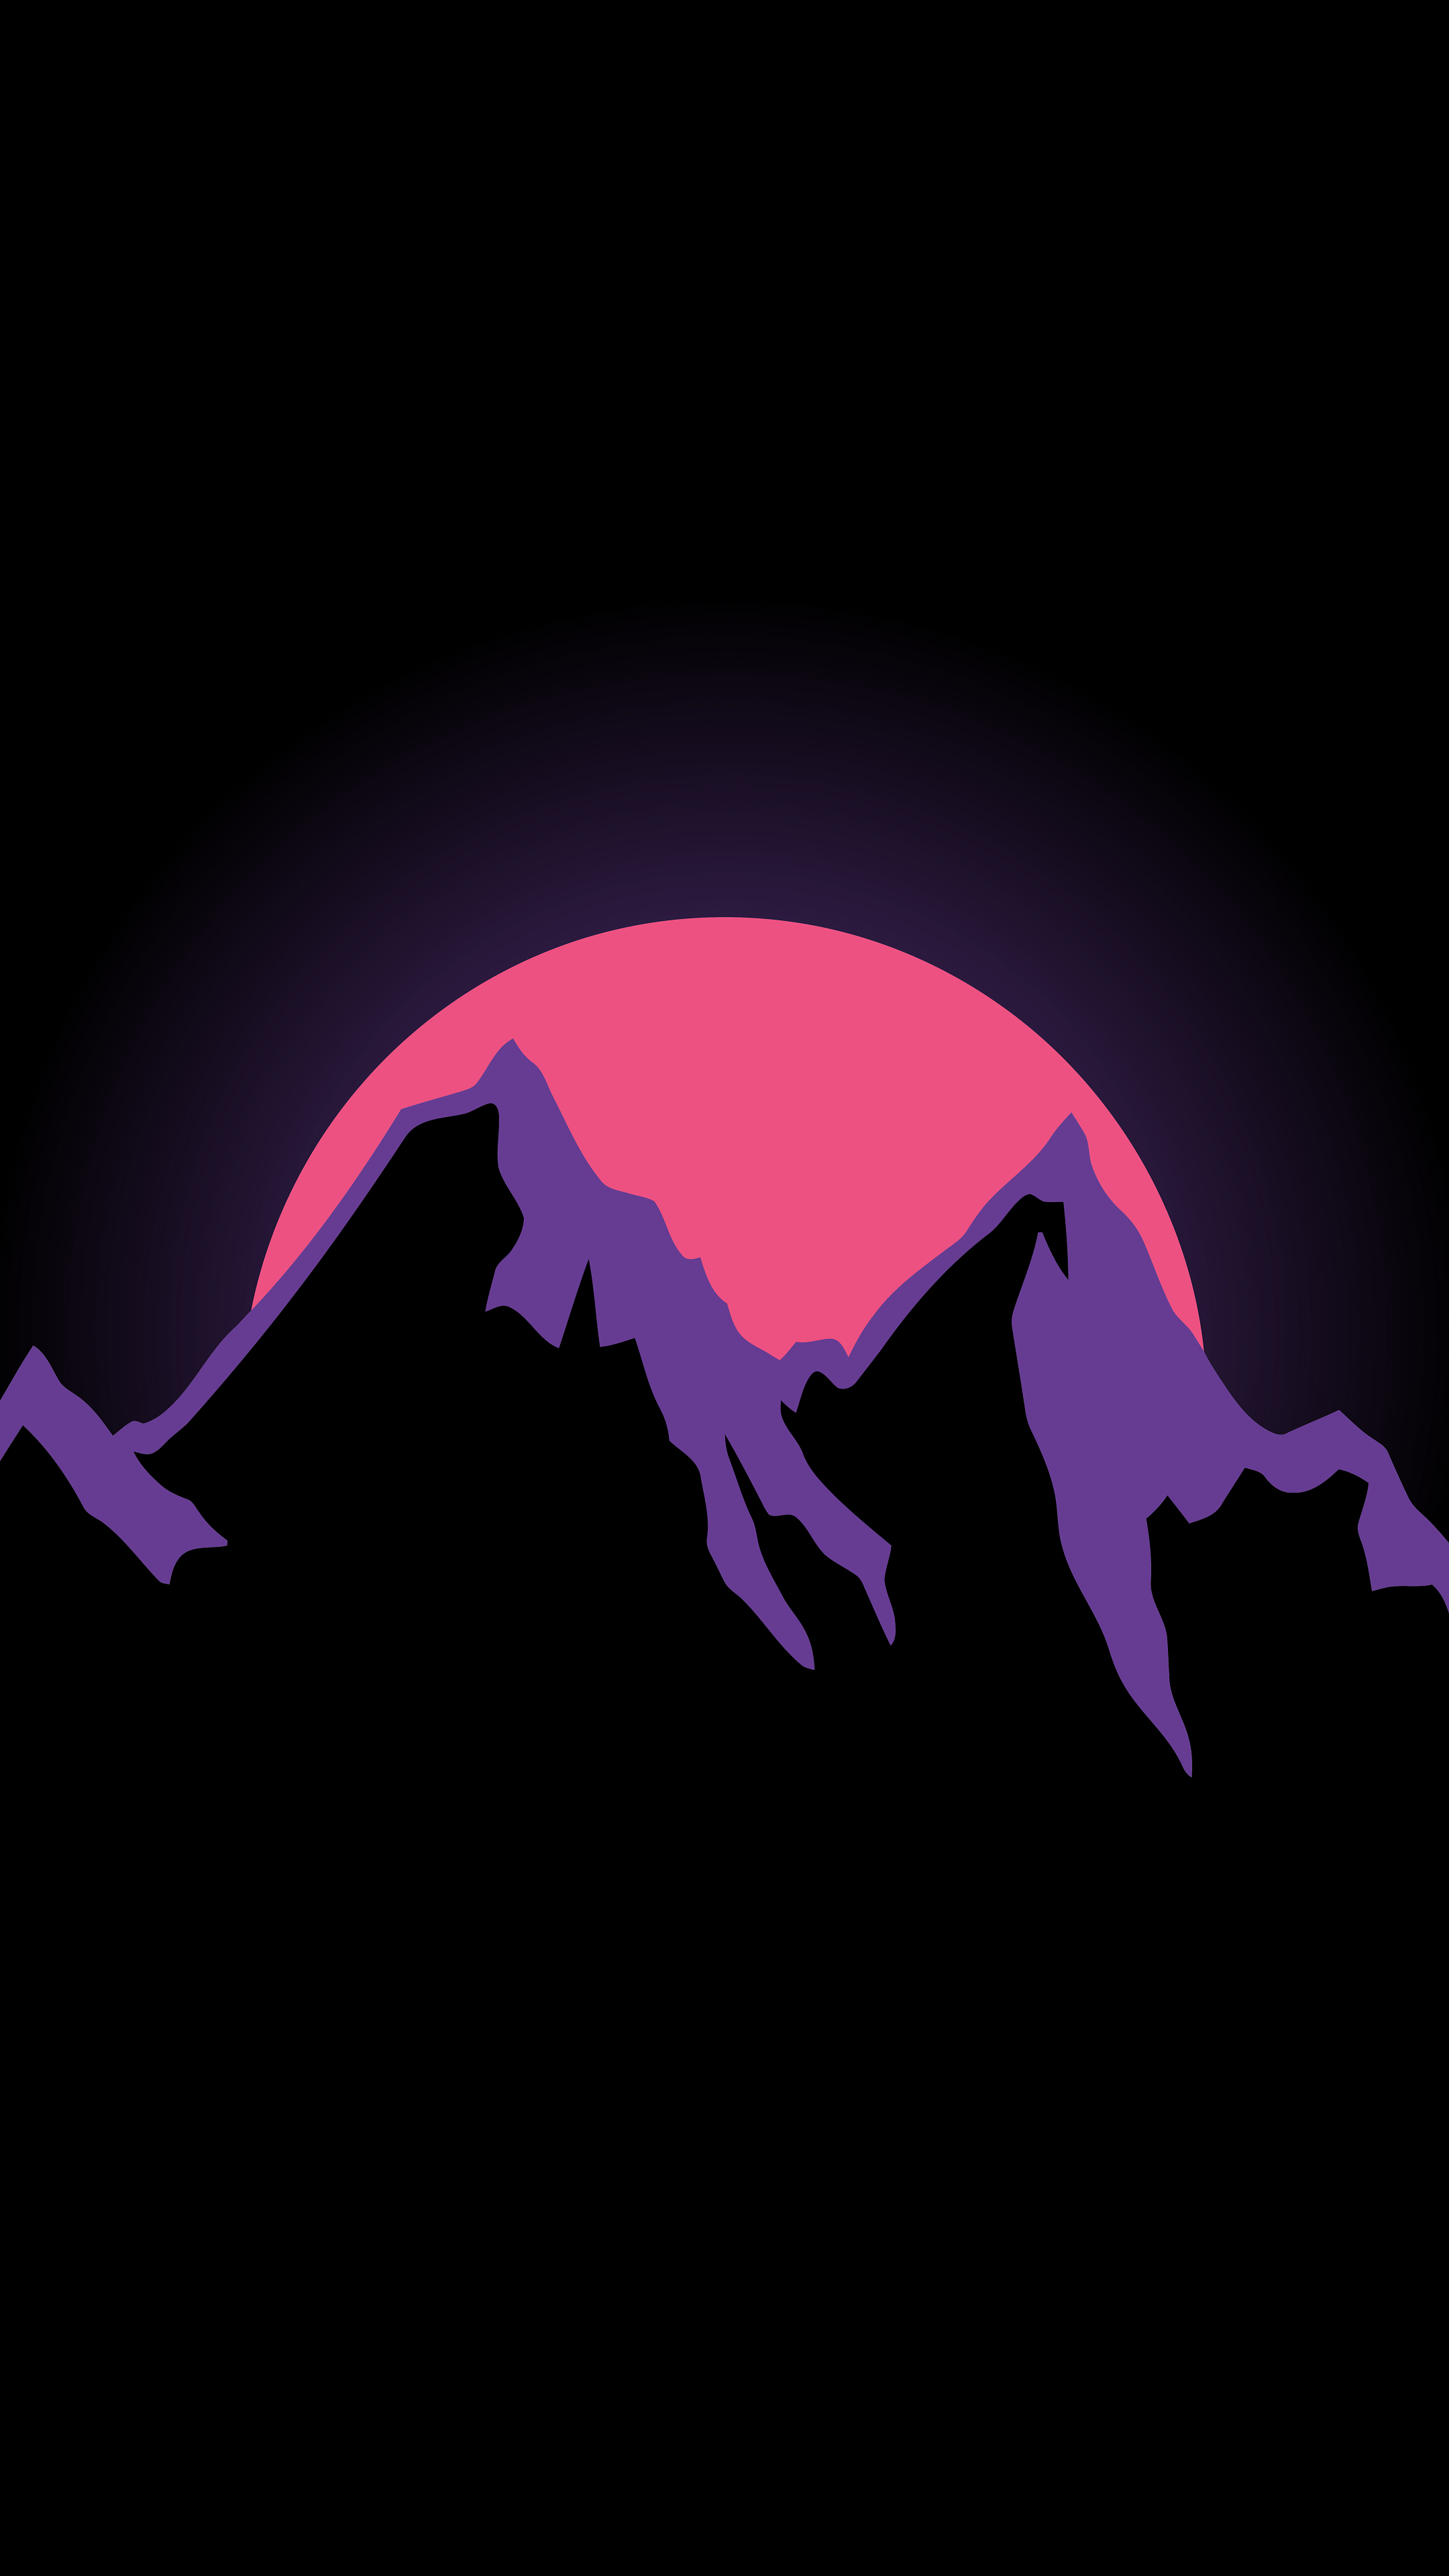 Outrun Styled Sunset. [2160x3840]